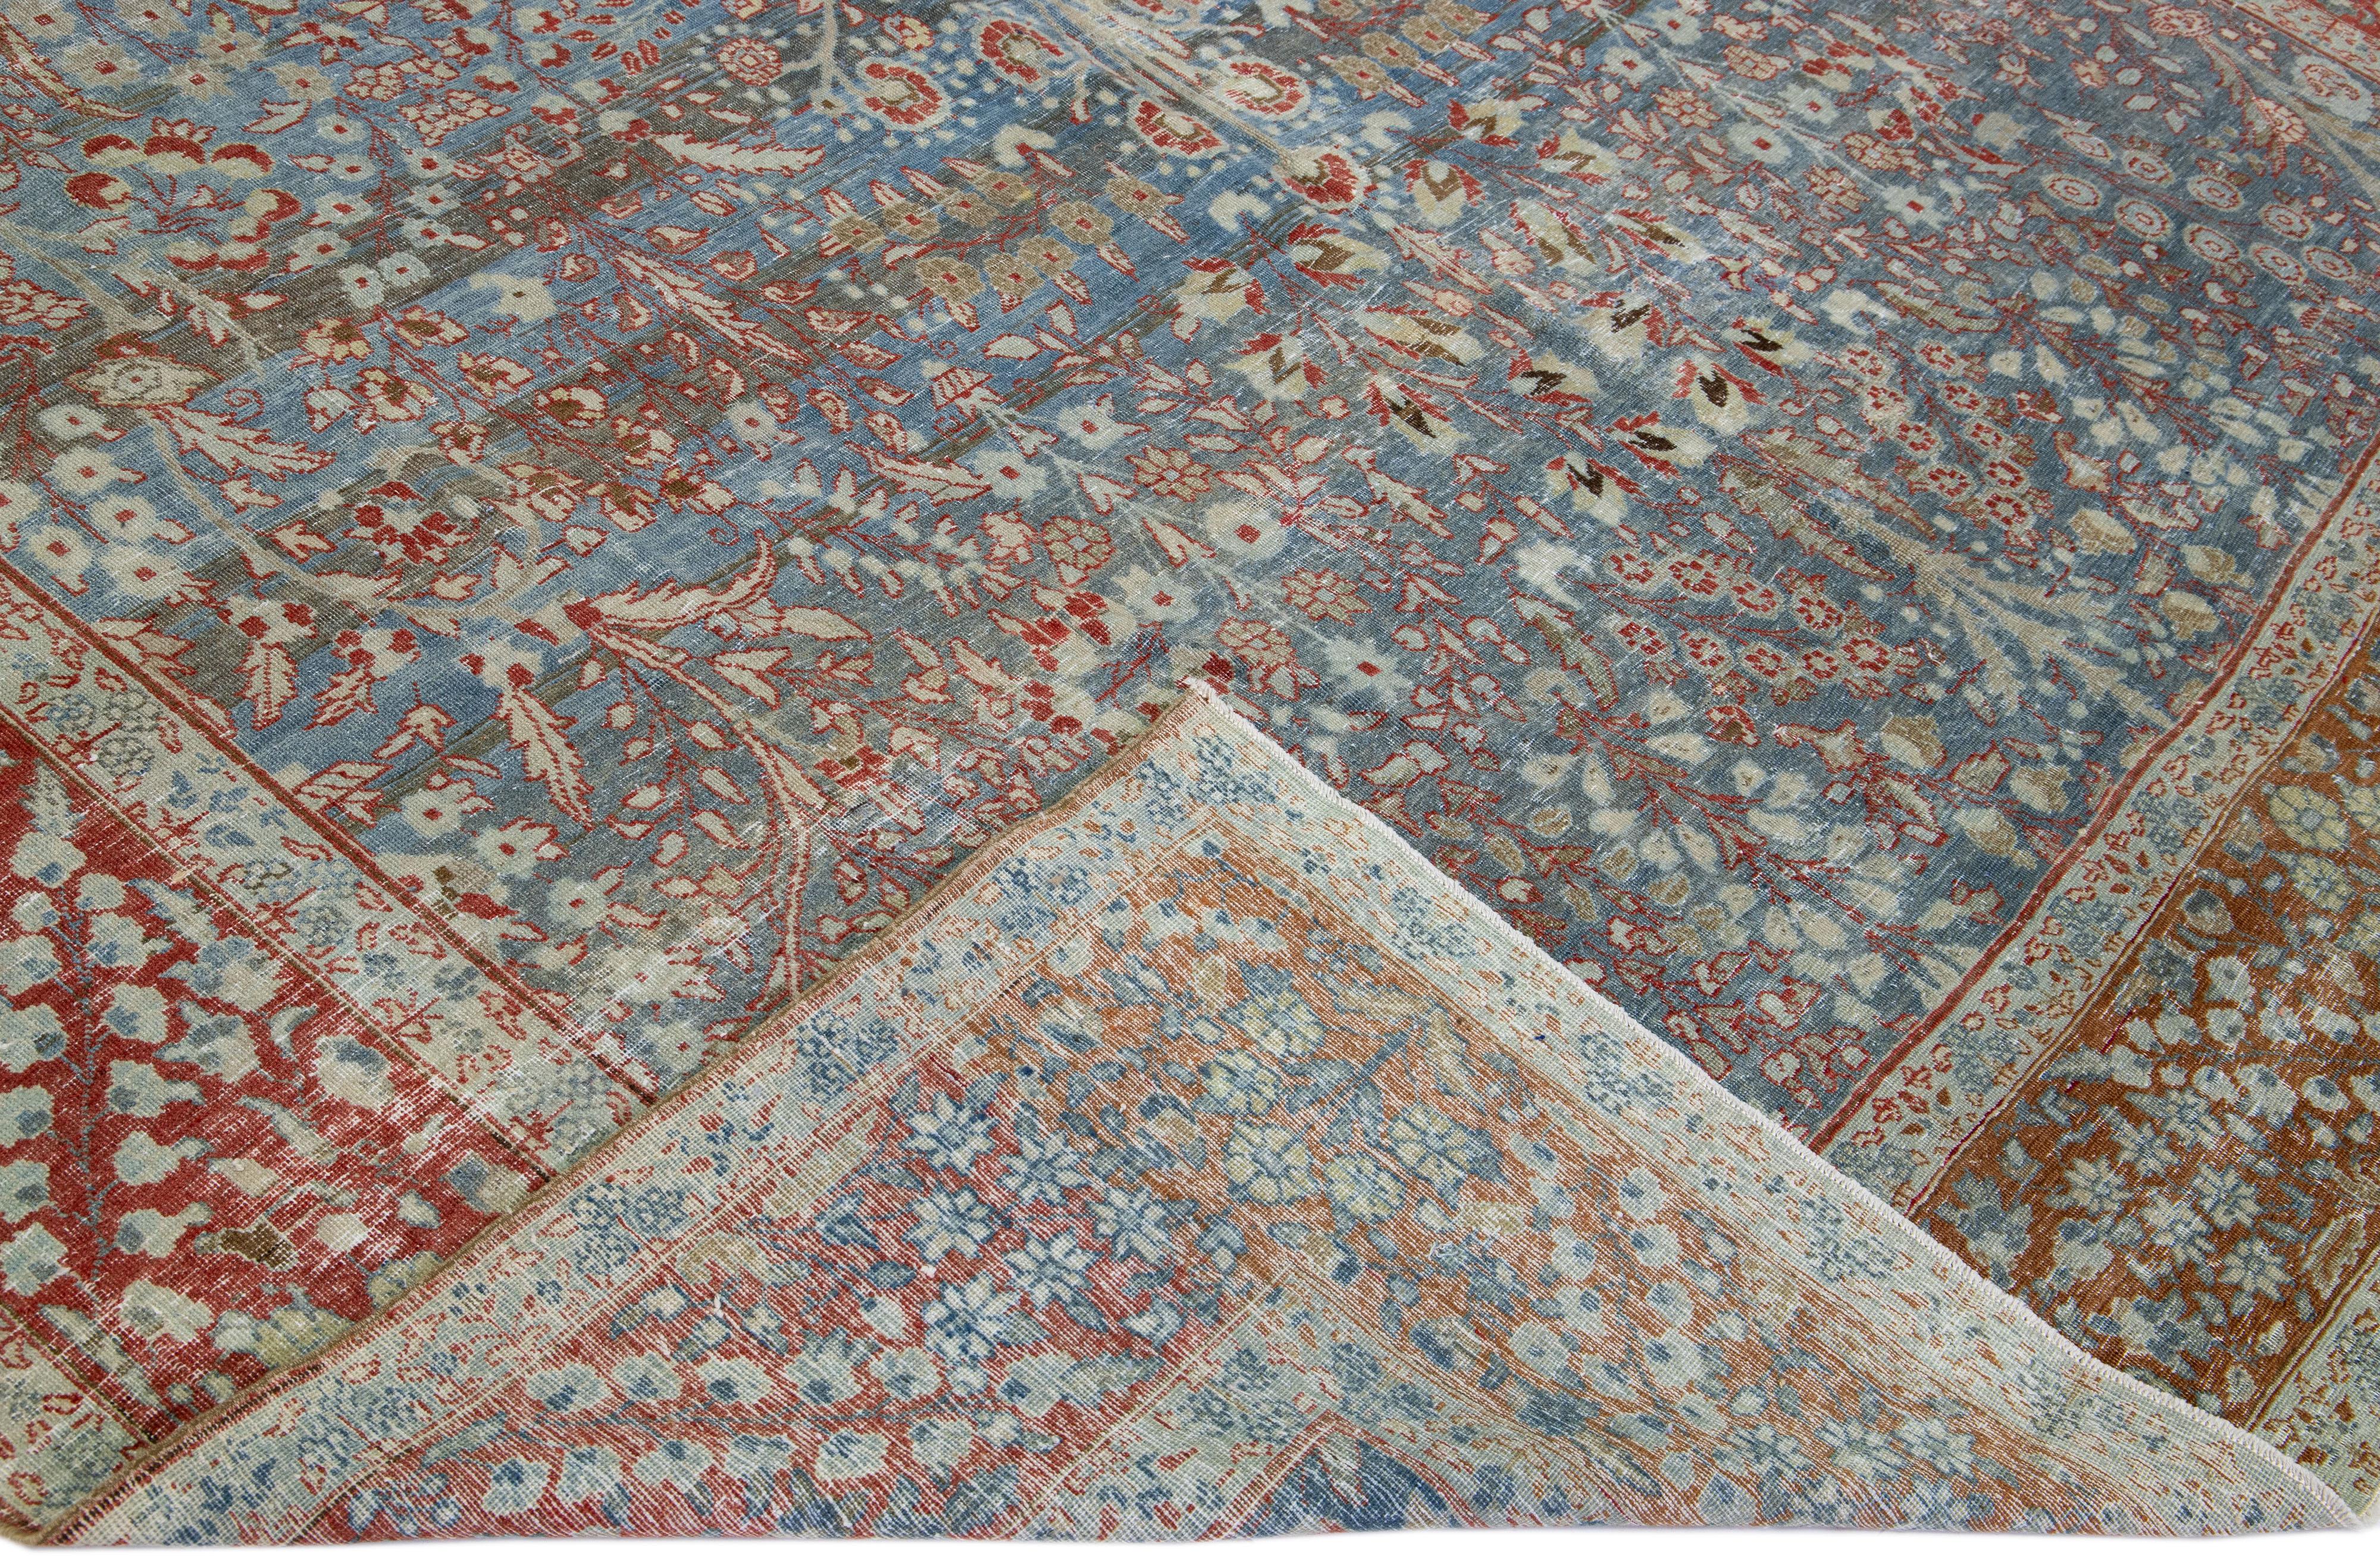 Beautiful antique Tabriz hand-knotted wool rug with a blue color field. This Persian rug has a red frame and accents in a gorgeous all-over floral design.

This rug measures: 9'5